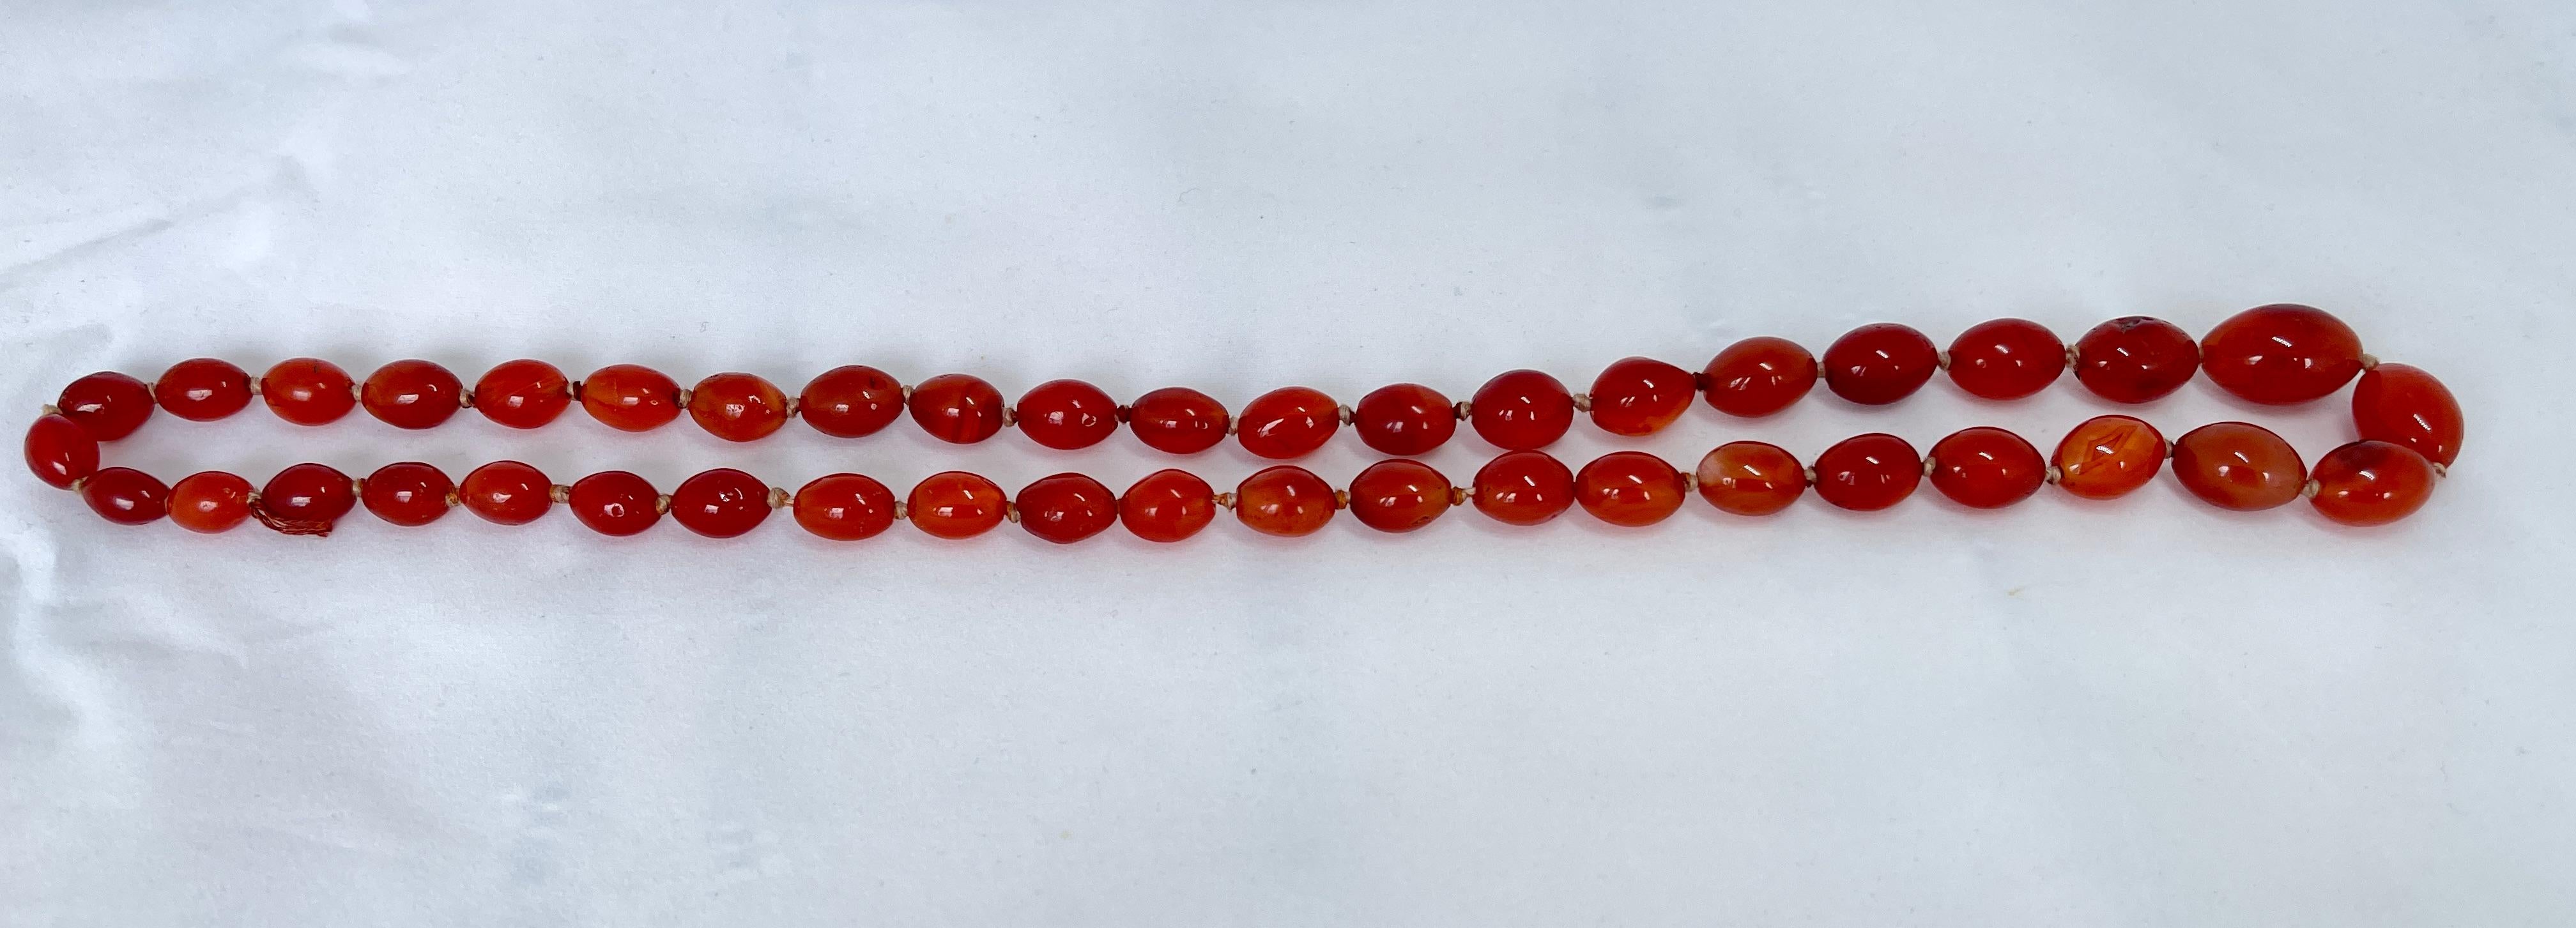 Women's Beautiful Vintage Natural Carnelian Oval Shaped Bead Necklace Dark Amber Colour For Sale